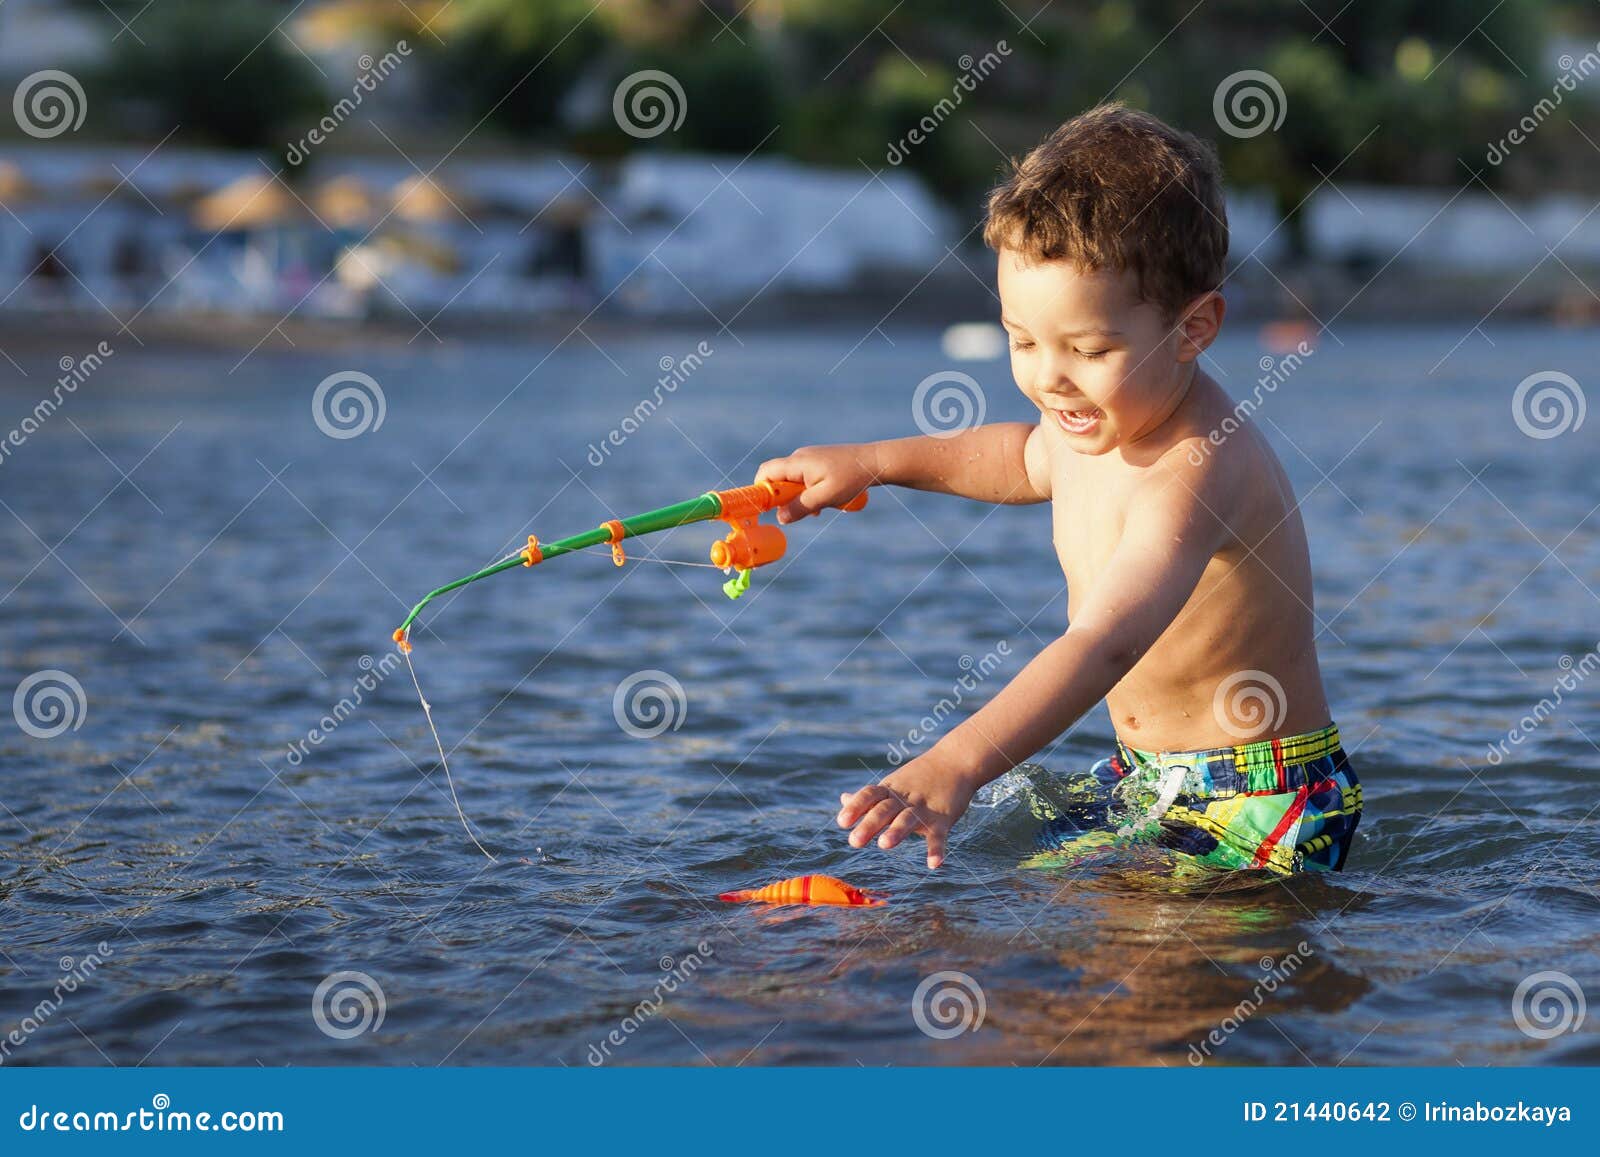 Little Boy and Toy Fishing Pole Stock Photo - Image of water